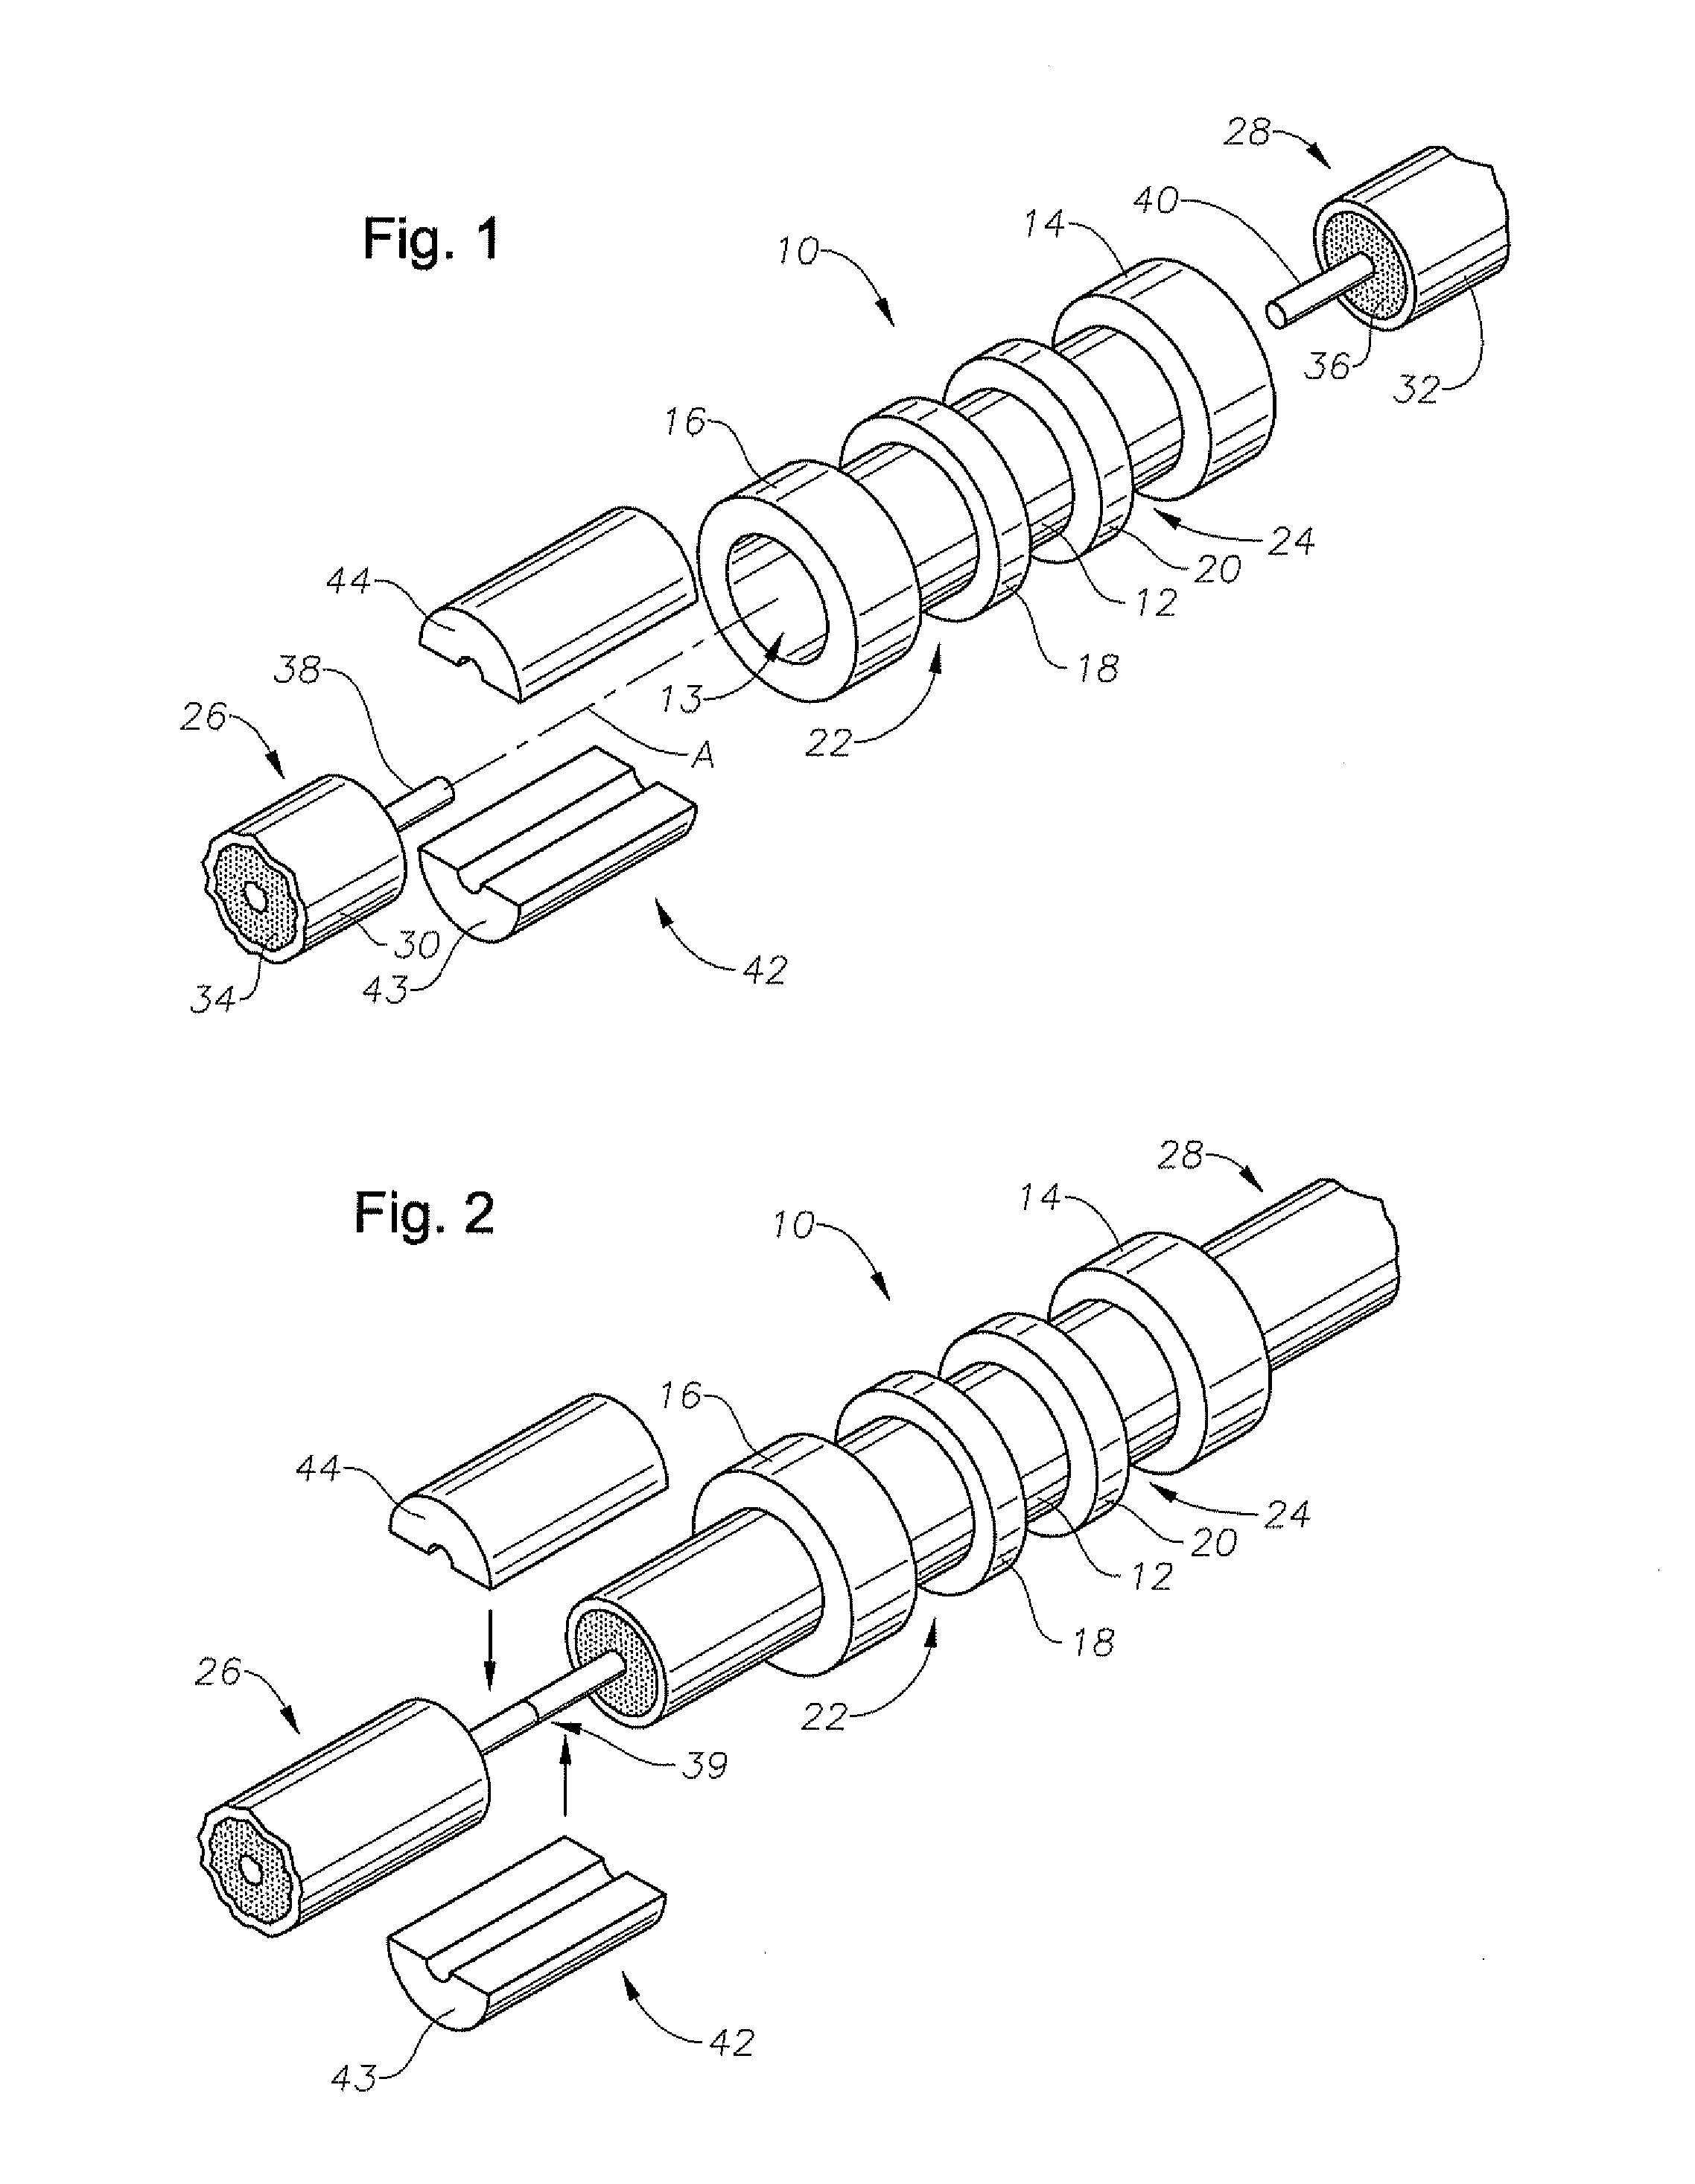 Mineral insulated metal sheathed cable connector and method of forming the connector